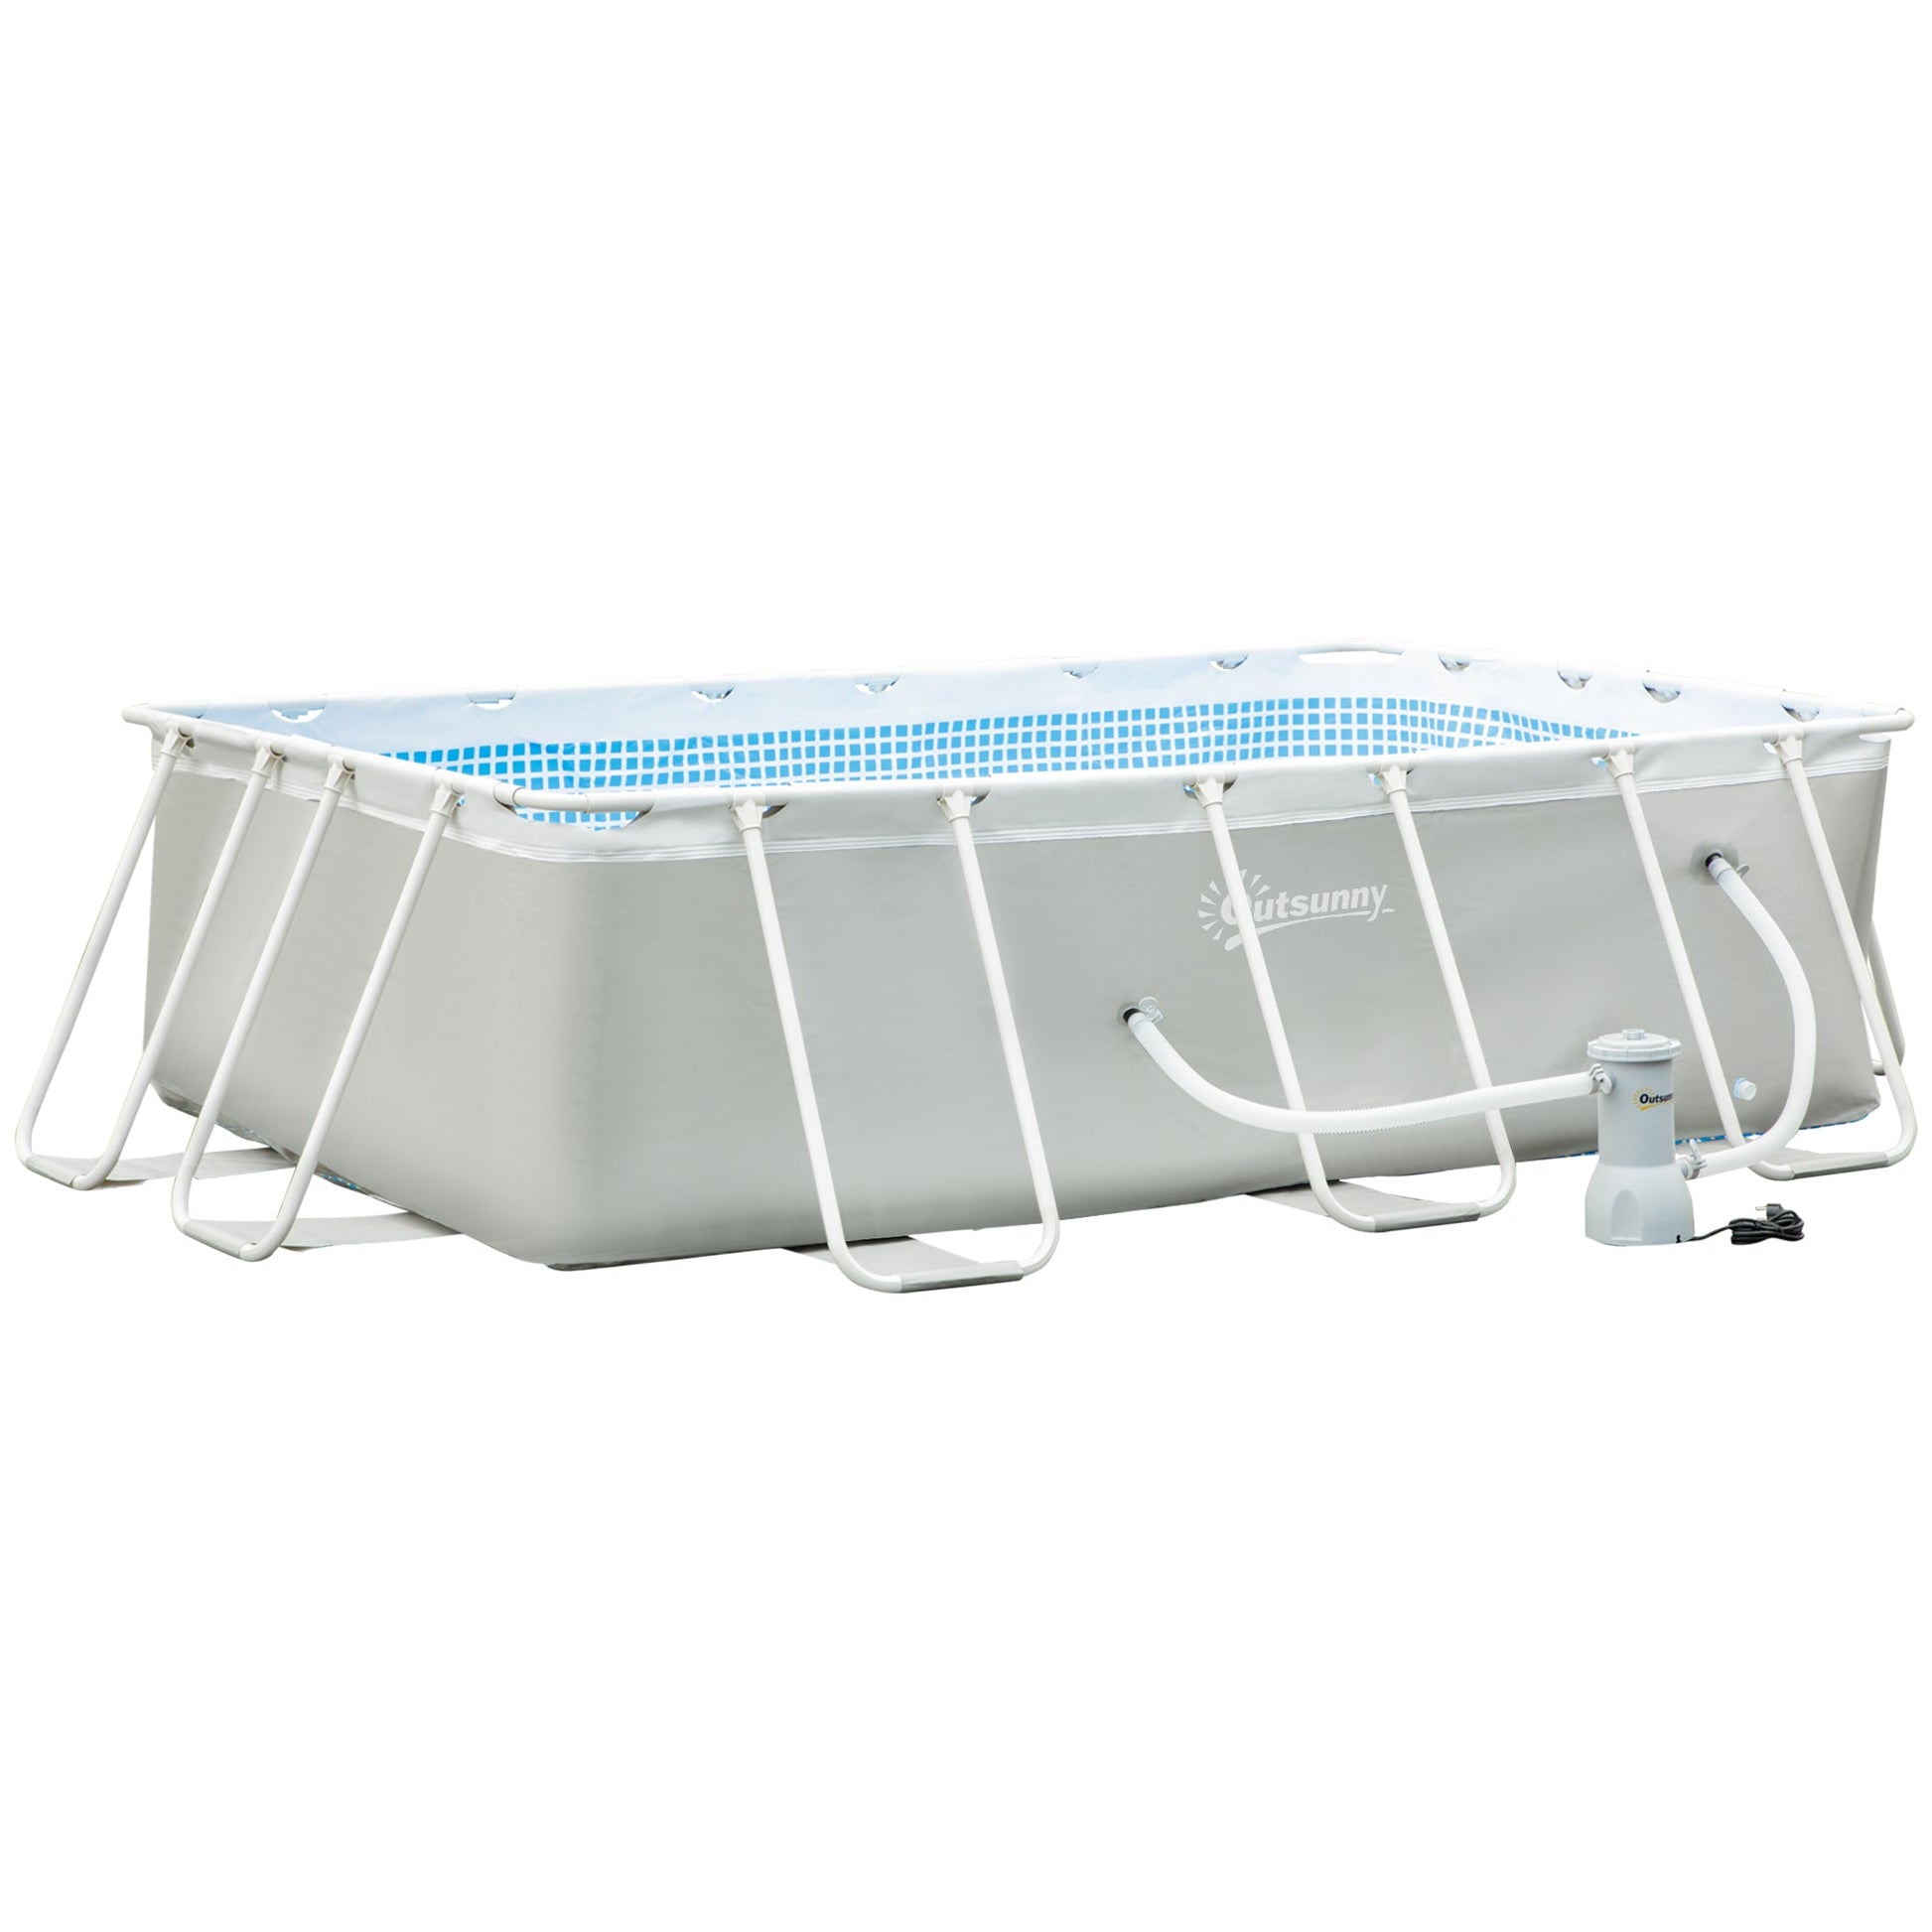 11ft x 7ft x 32in Steel Frame Pool with Nano Filter Pump, Outdoor Rectangular Frame Above Ground Swimming Pool, Light Grey at Gallery Canada